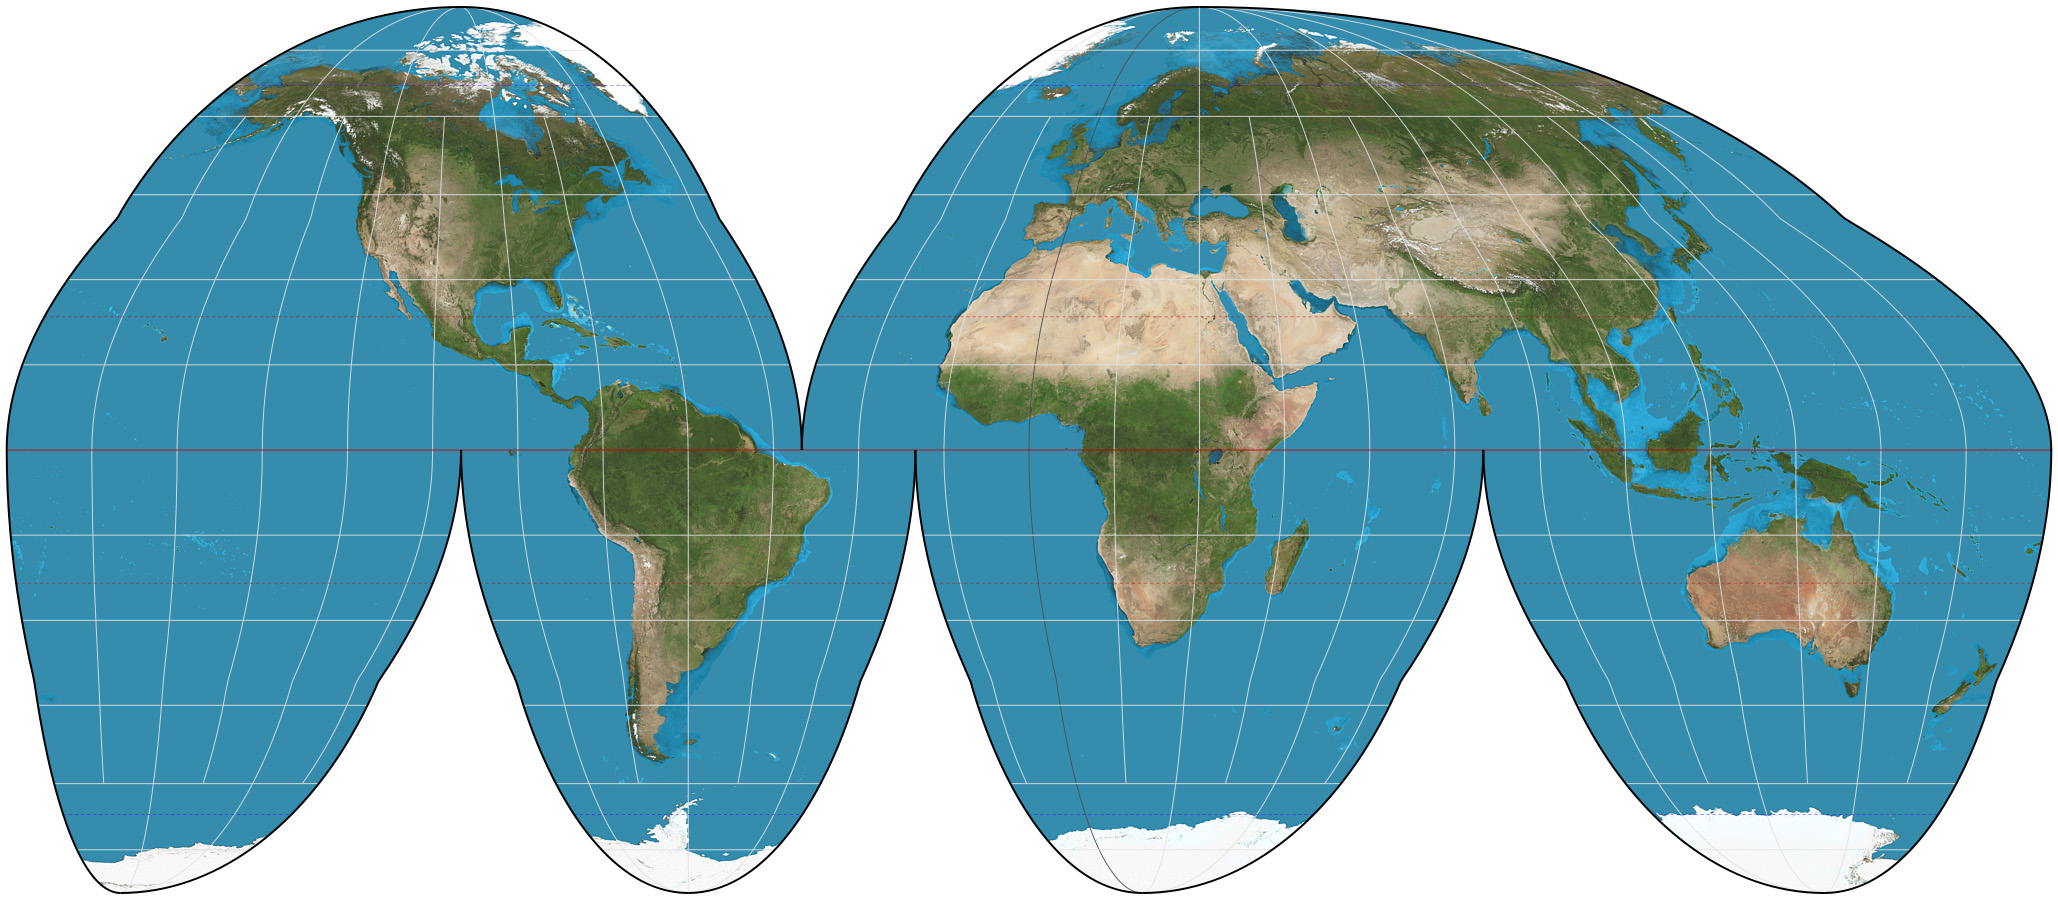 What map is more accurate than Mercator?